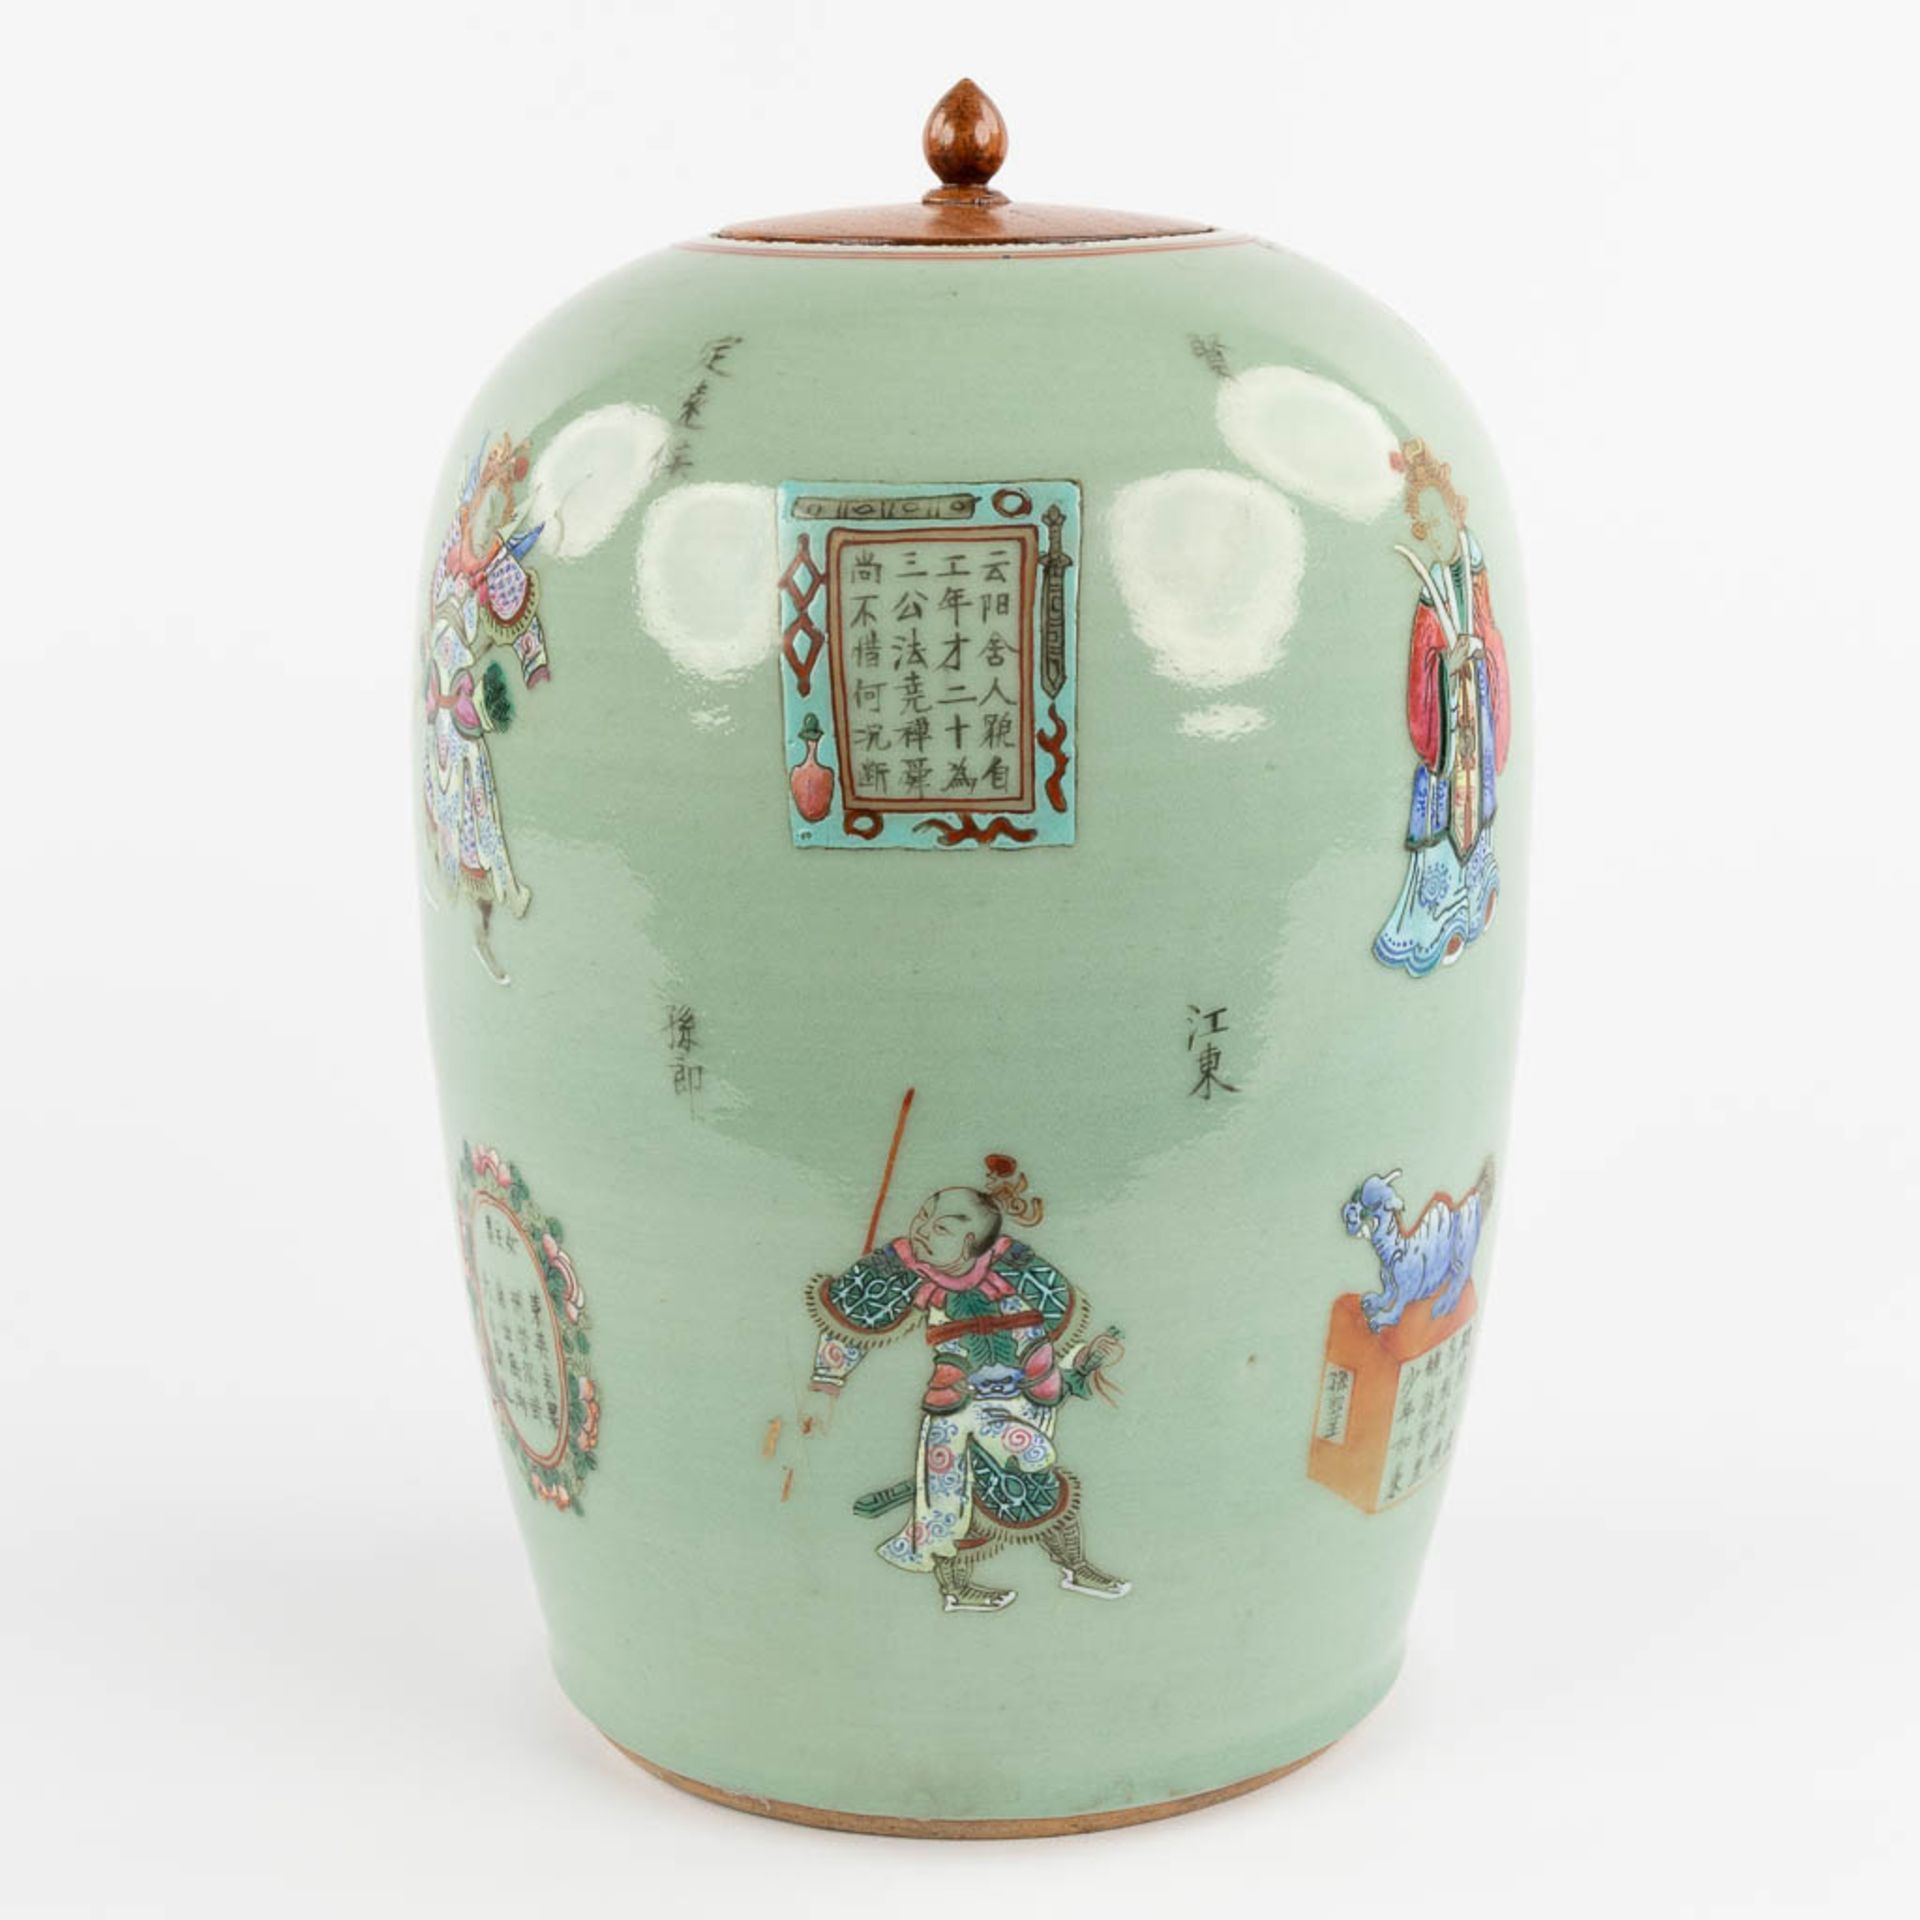 A Chinese Celadon ground ginger jar, decorated with warriors, calligraphy, and mythological figurine - Image 3 of 16